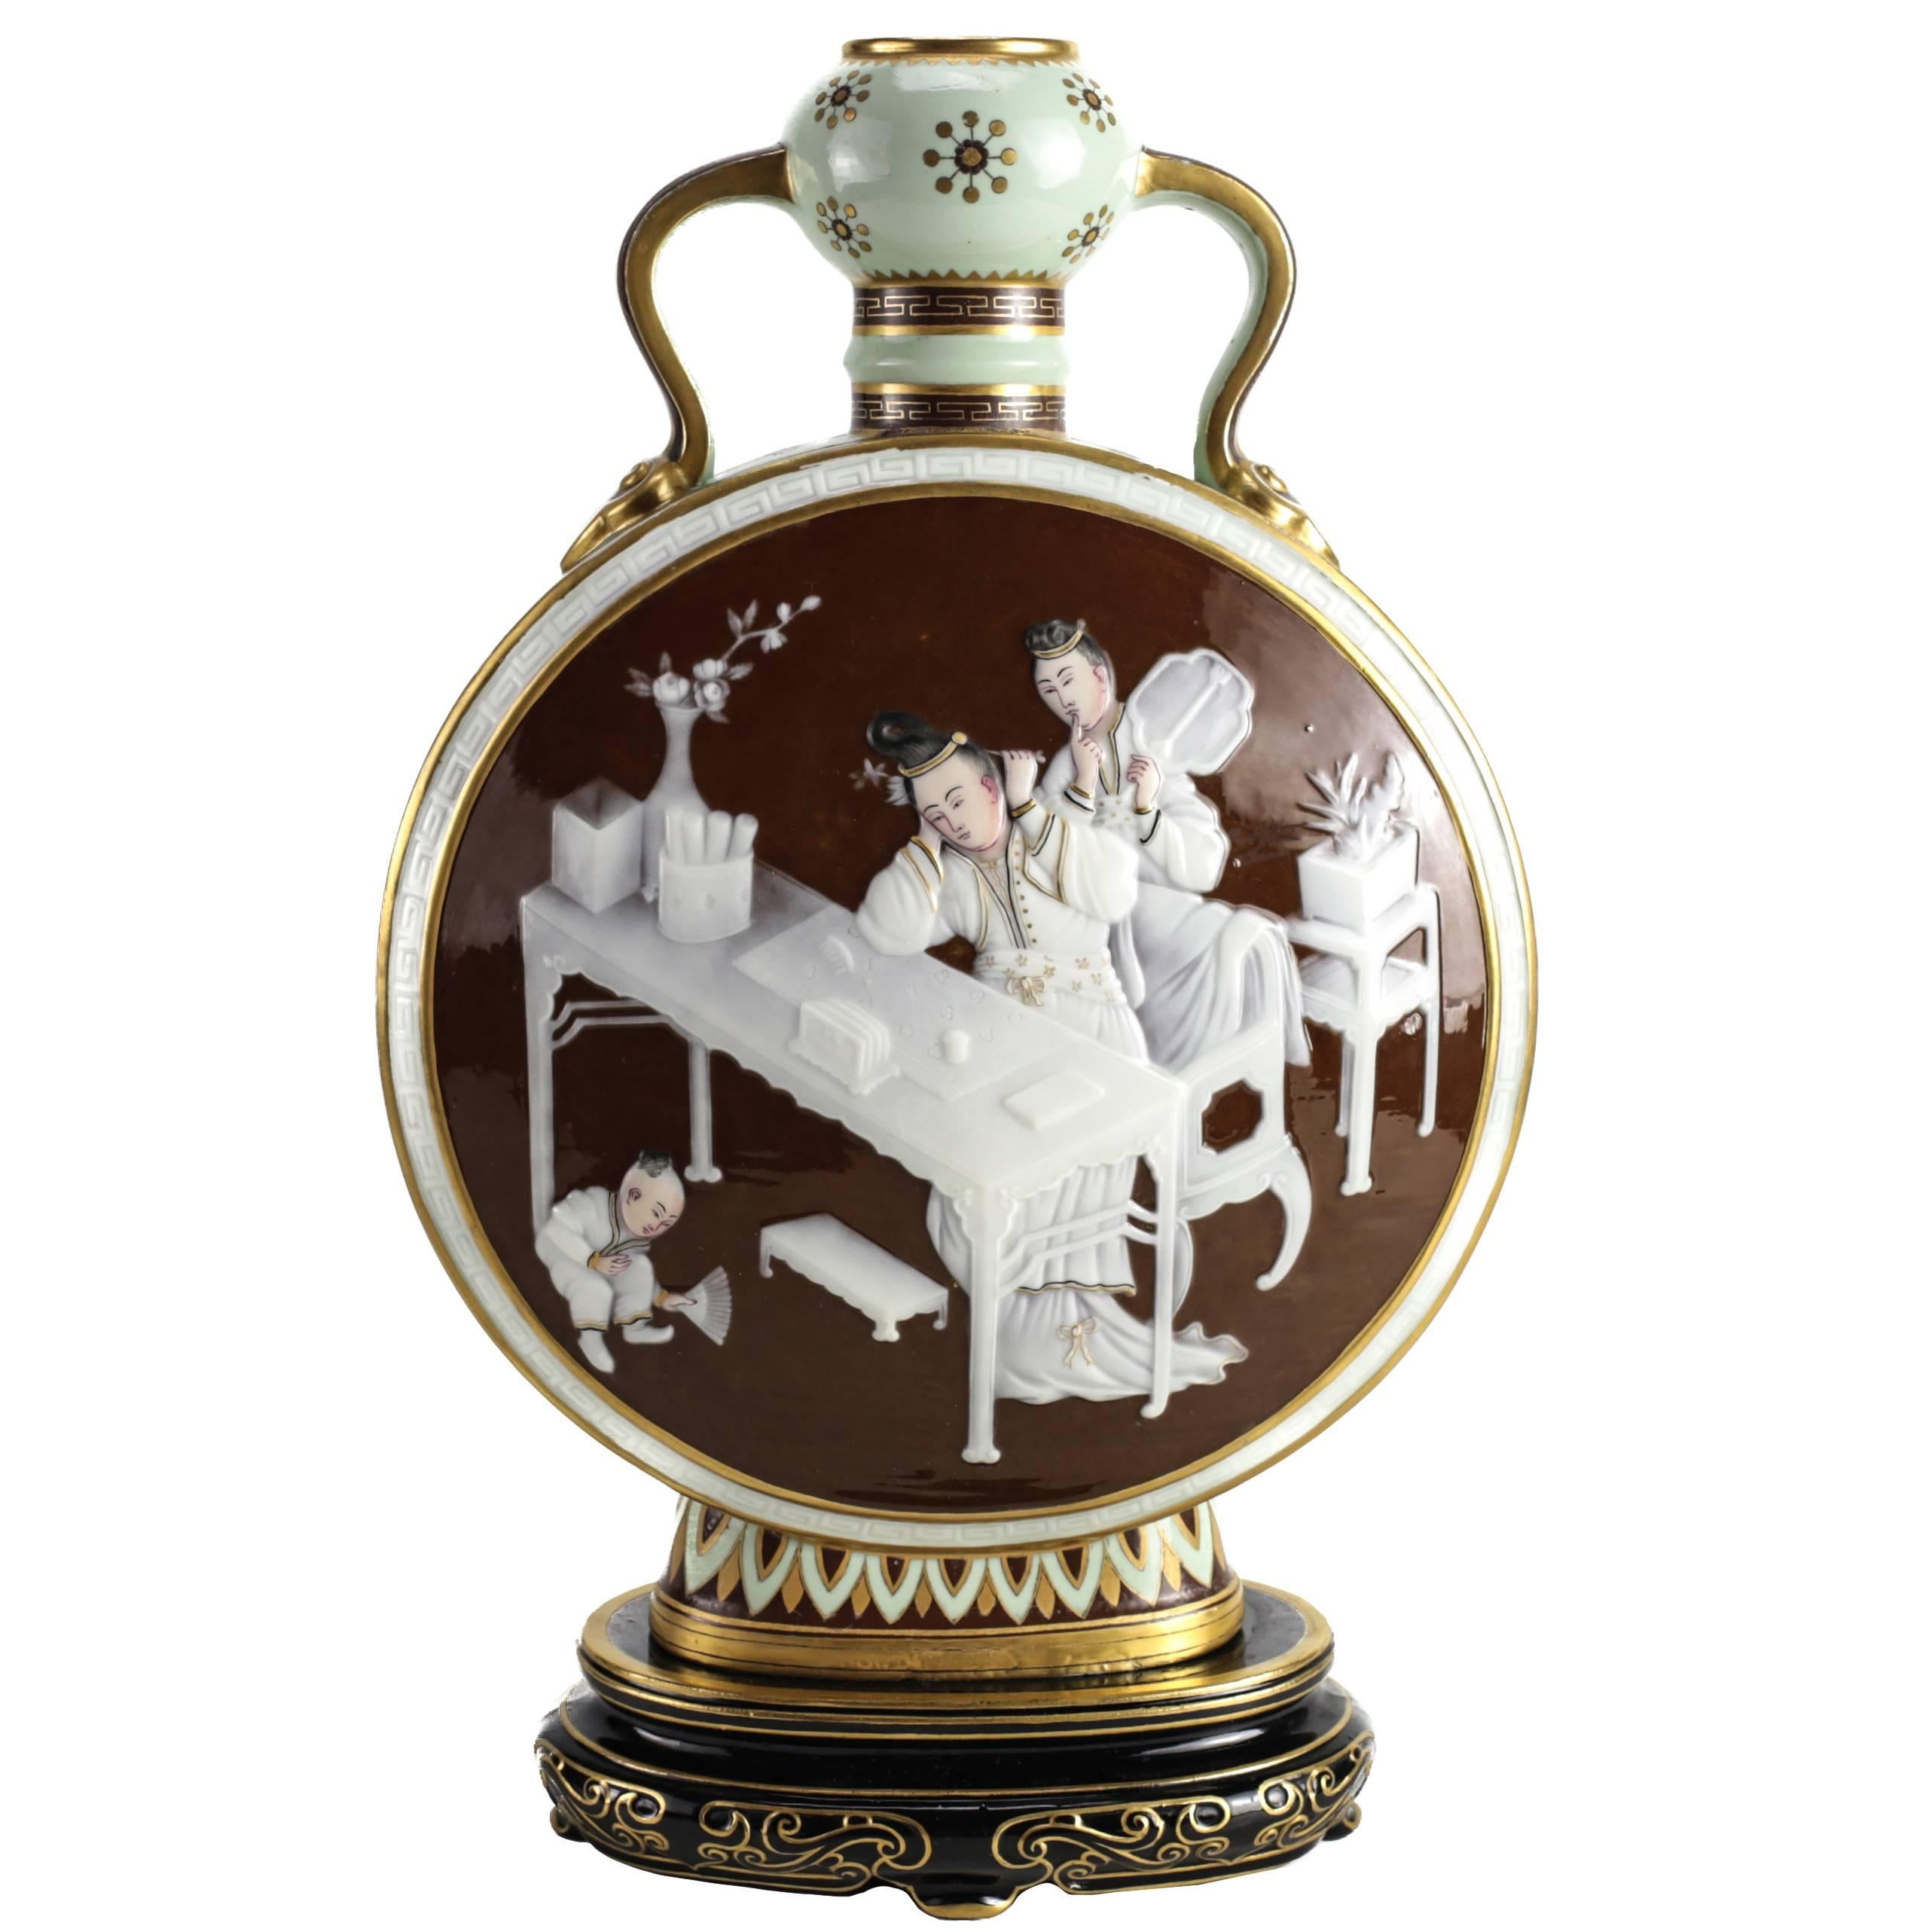 Pate-Sur-Pate Decorated Porcelain Moon Flask by Mintons, 1876 For Sale